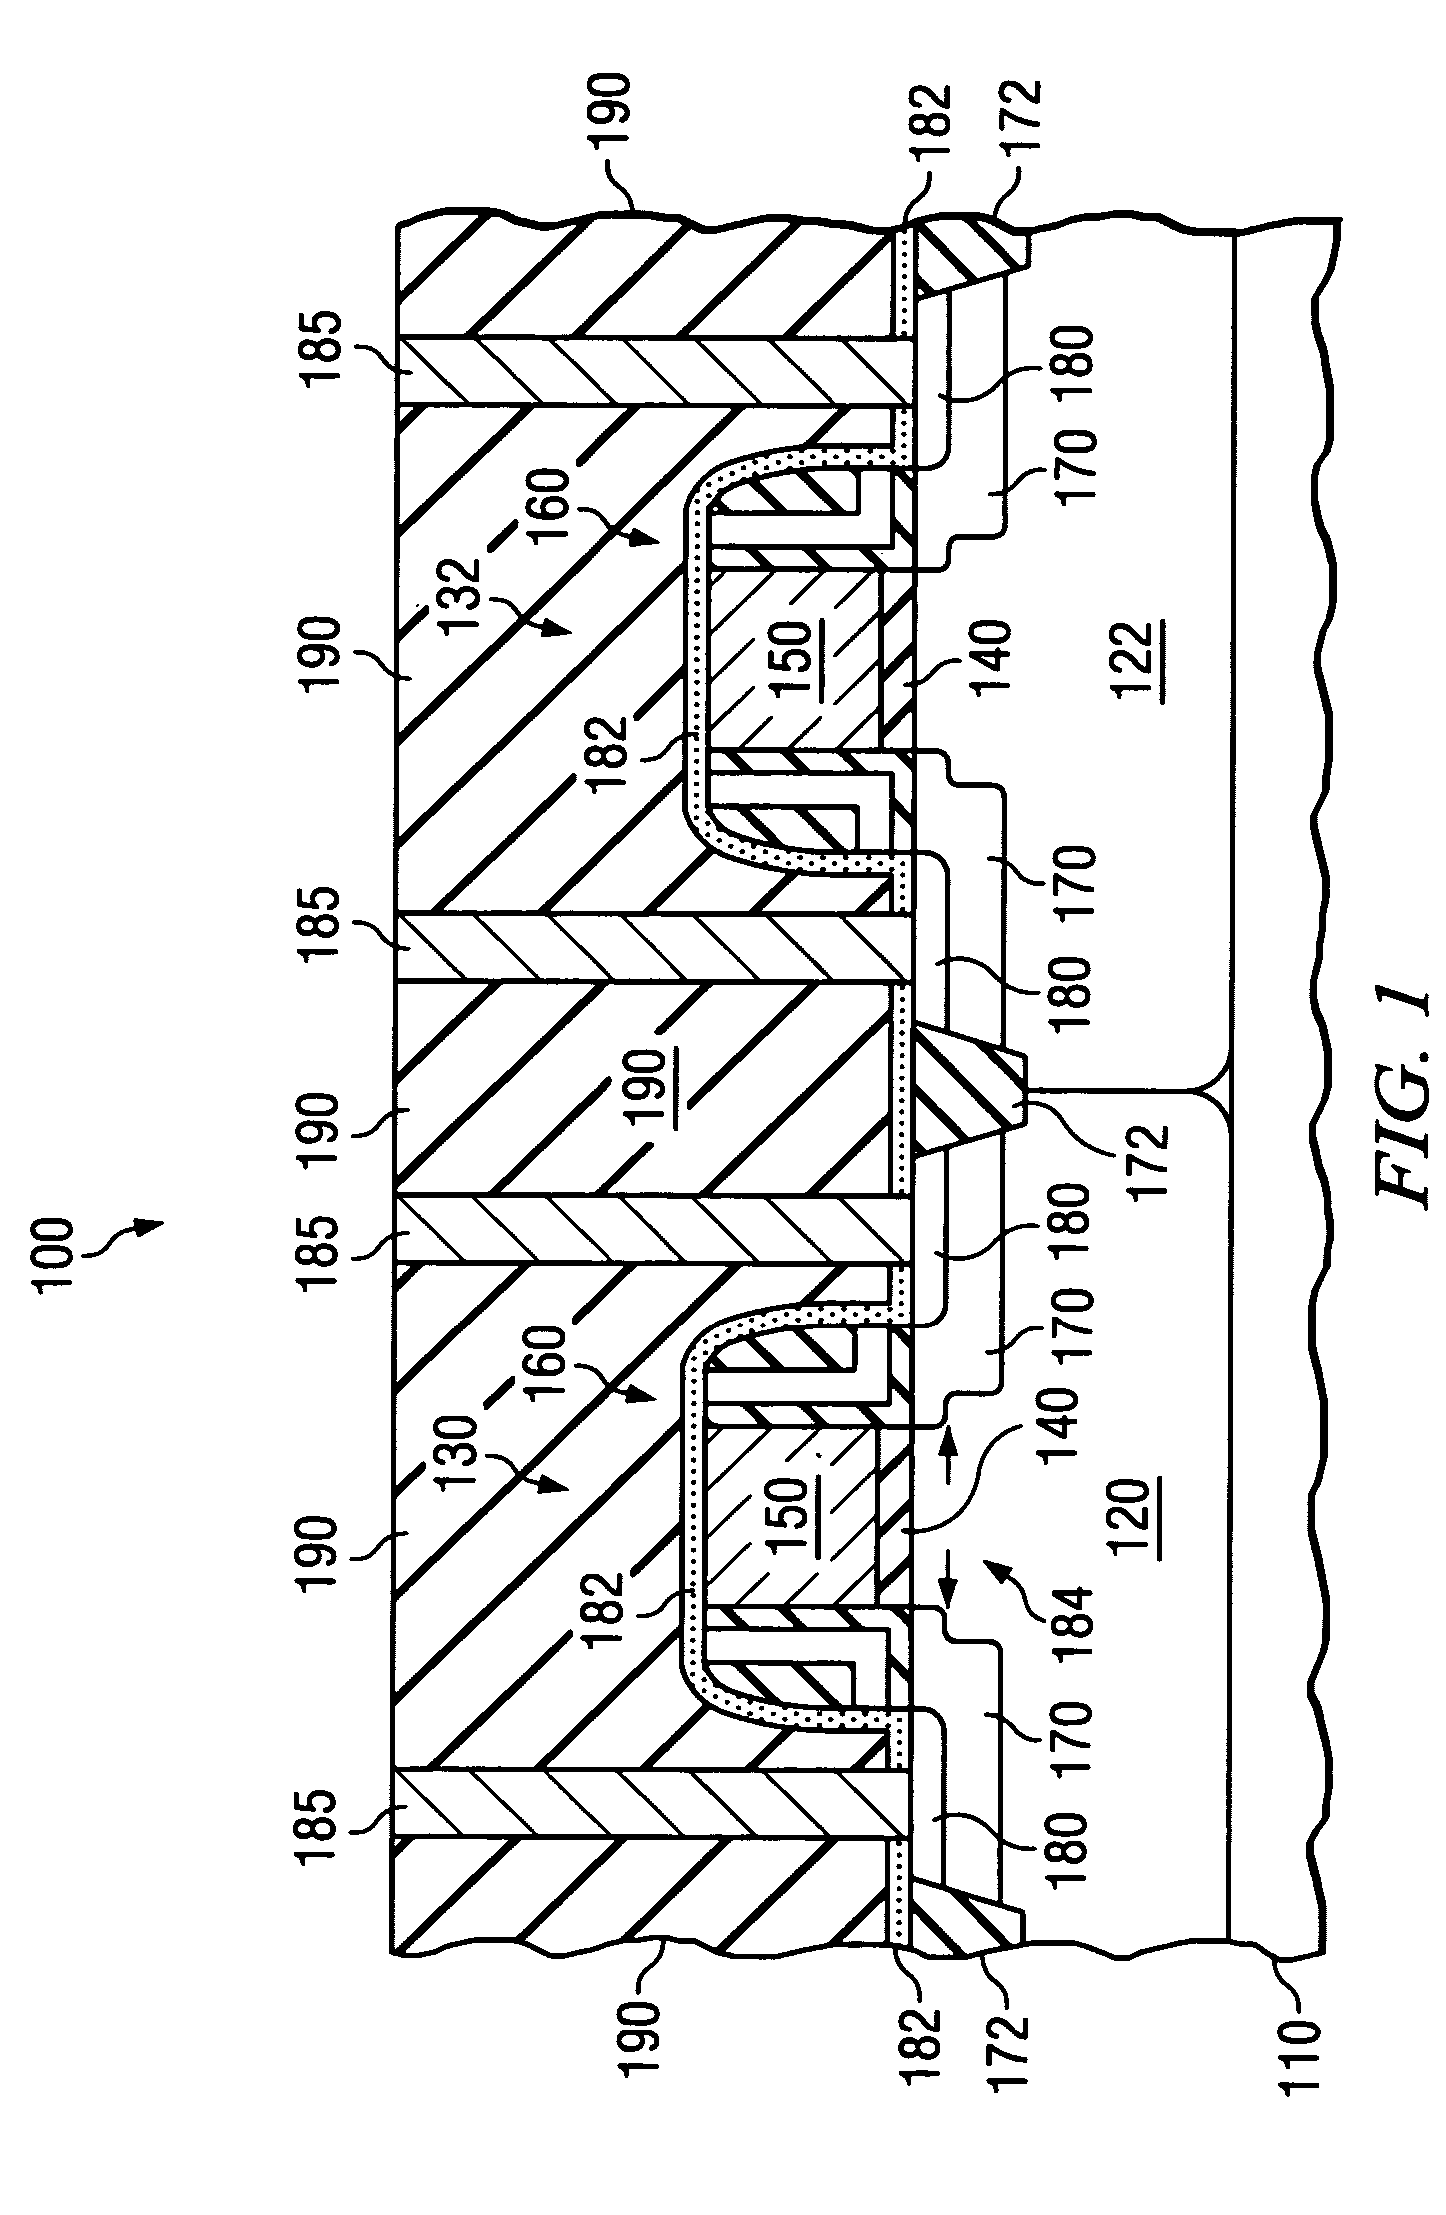 Method of fabricating a microelectronic device using electron beam treatment to induce stress